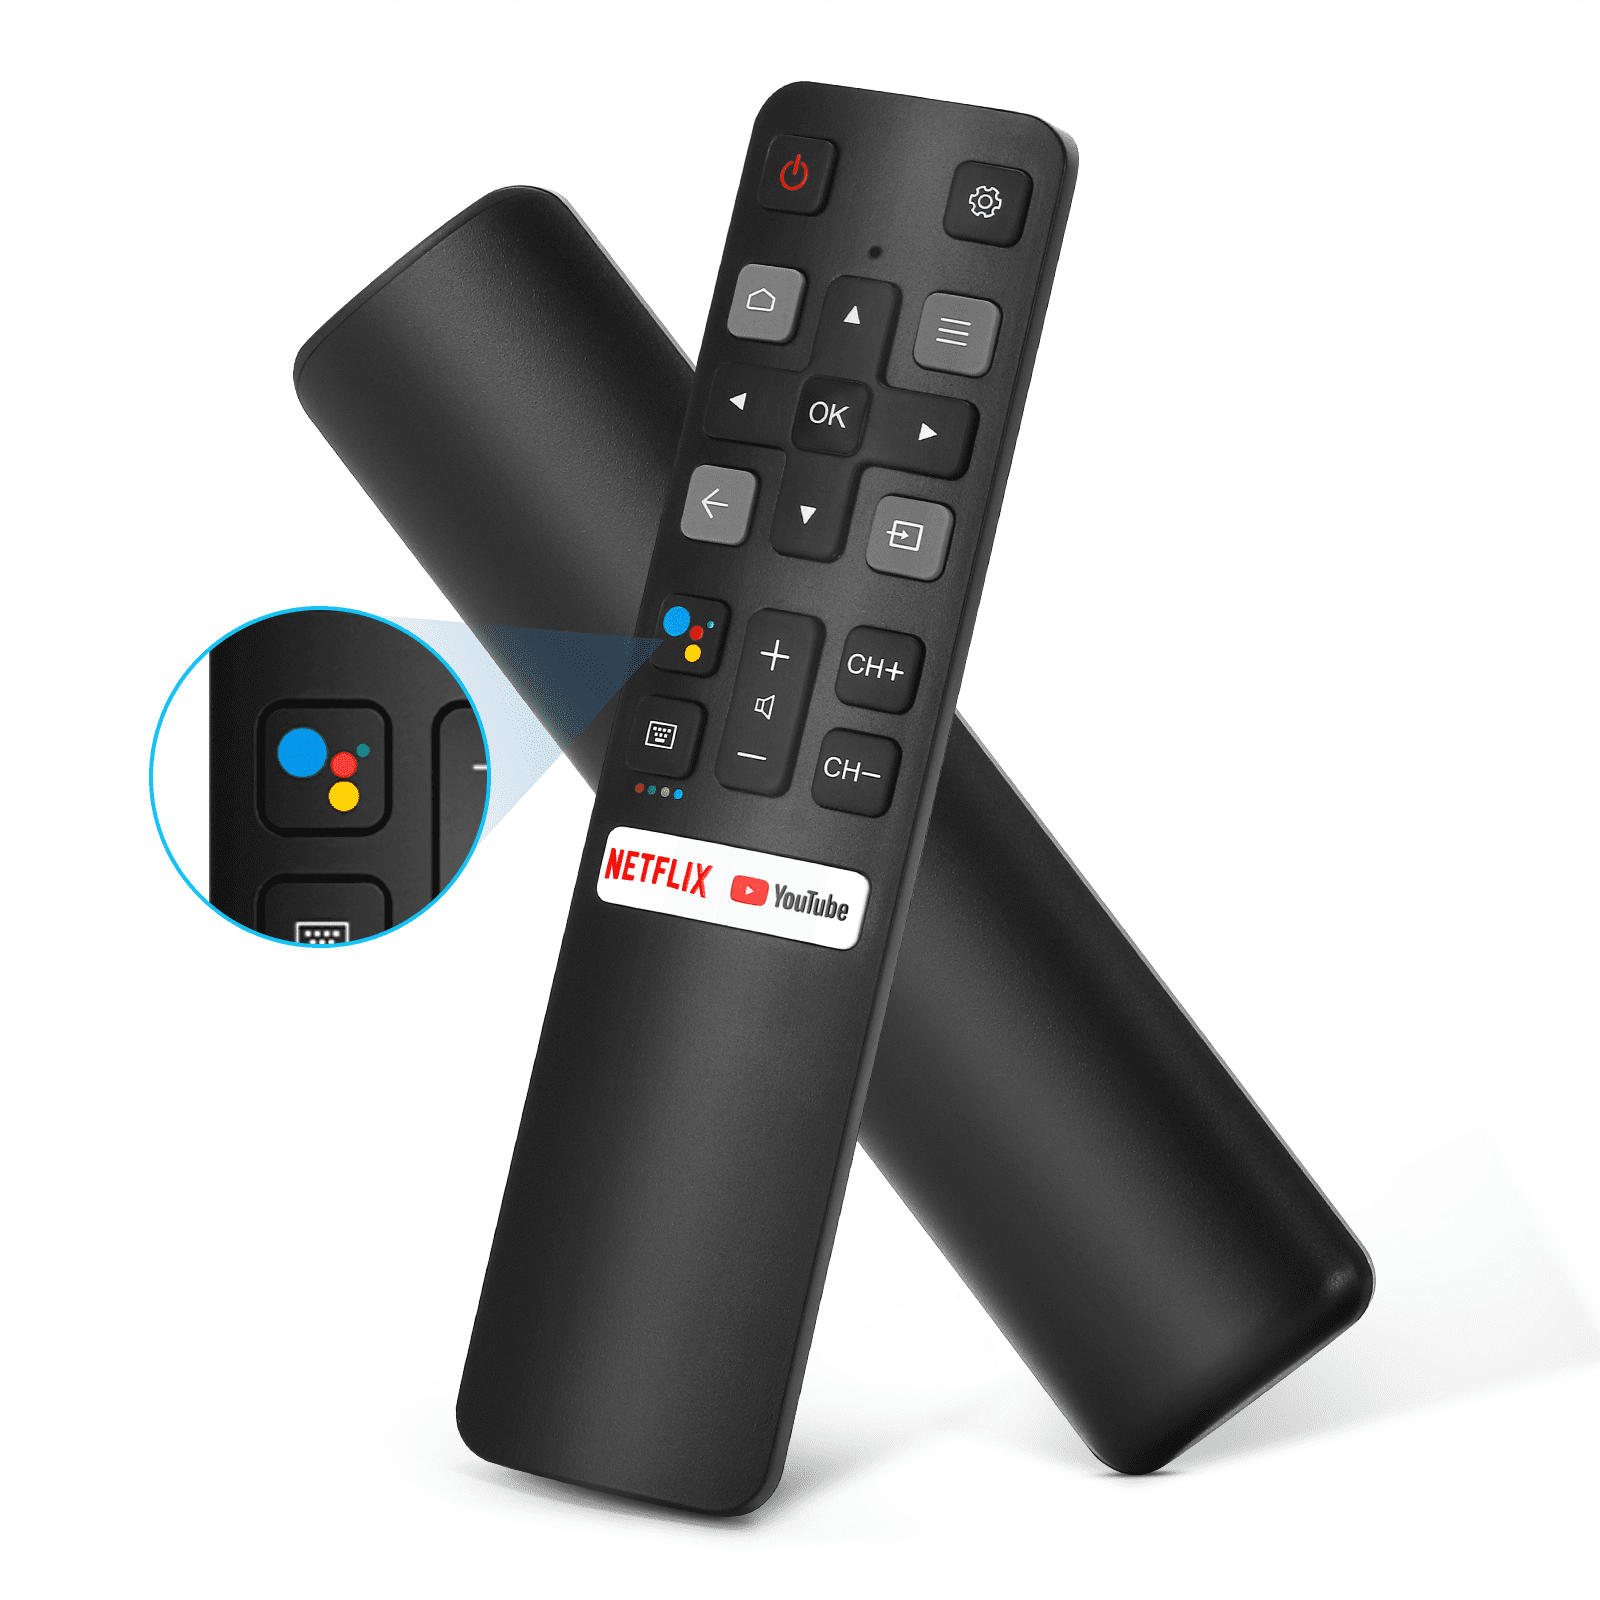 RC802V Replaced Voice Remote For TCL Android TV Model 55C715(P10) And All  Android 4K UHD TCL Smart Televisions